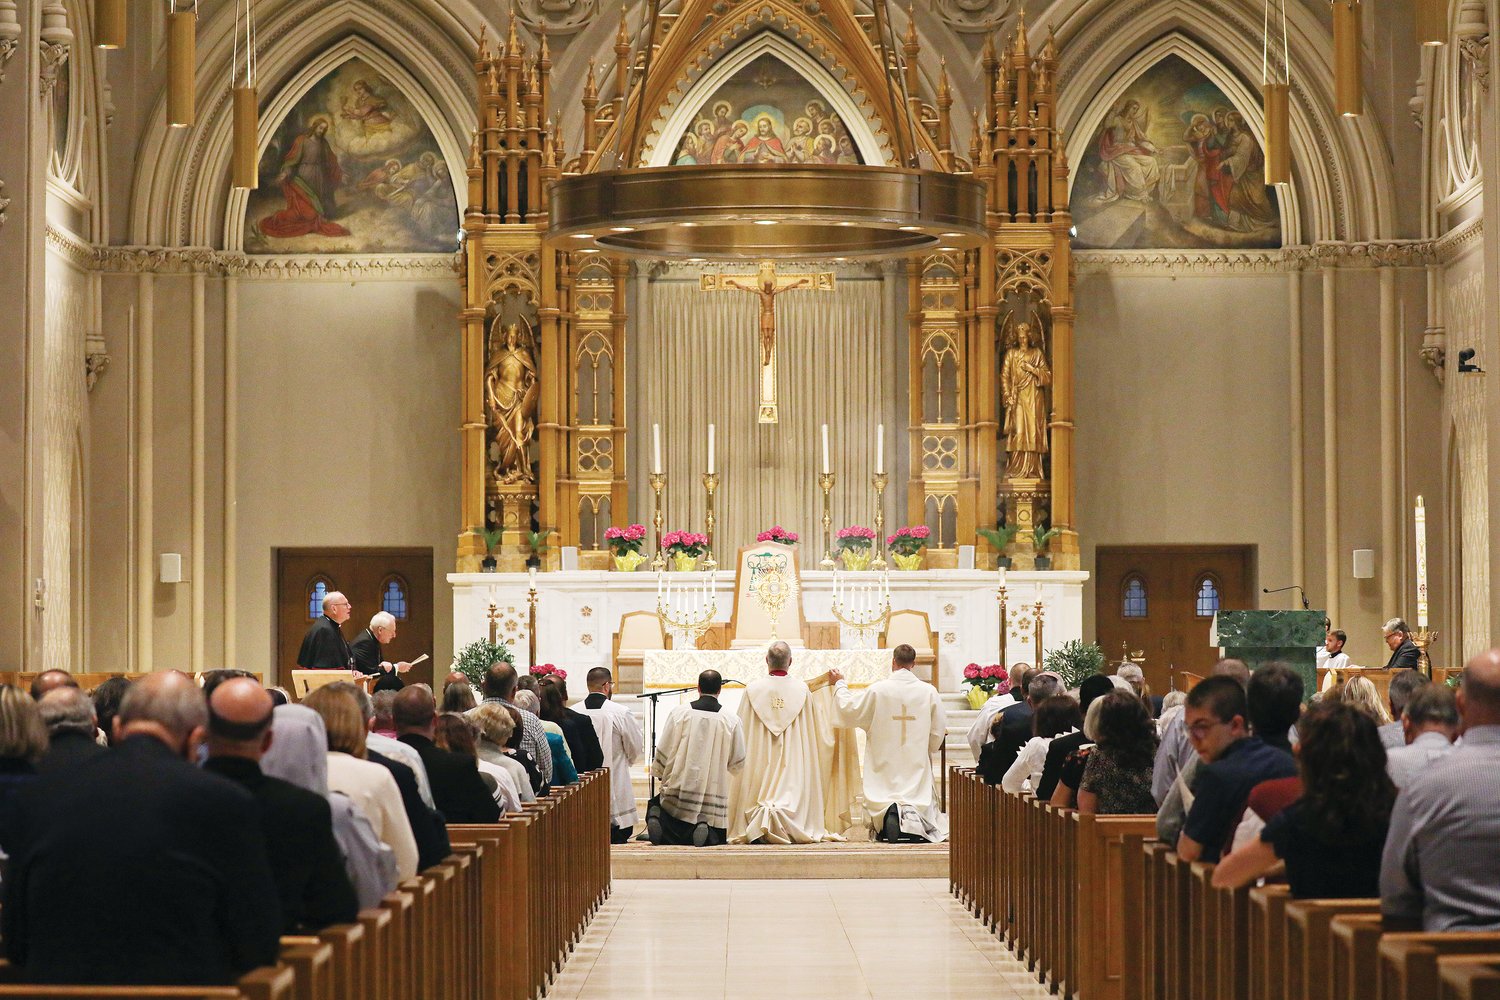 Hundreds join Bishop Thomas J. Tobin in prayer before the Blessed Sacrament on Sunday, May 15, 2022. The faithful filled the Cathedral of SS. Peter and Paul for Eucharistic Adoration as well as a talk by Cardinal Timothy M. Dolan, Archbishop of New York, in a major event held in celebration of the 150th anniversary of the Diocese of Providence.